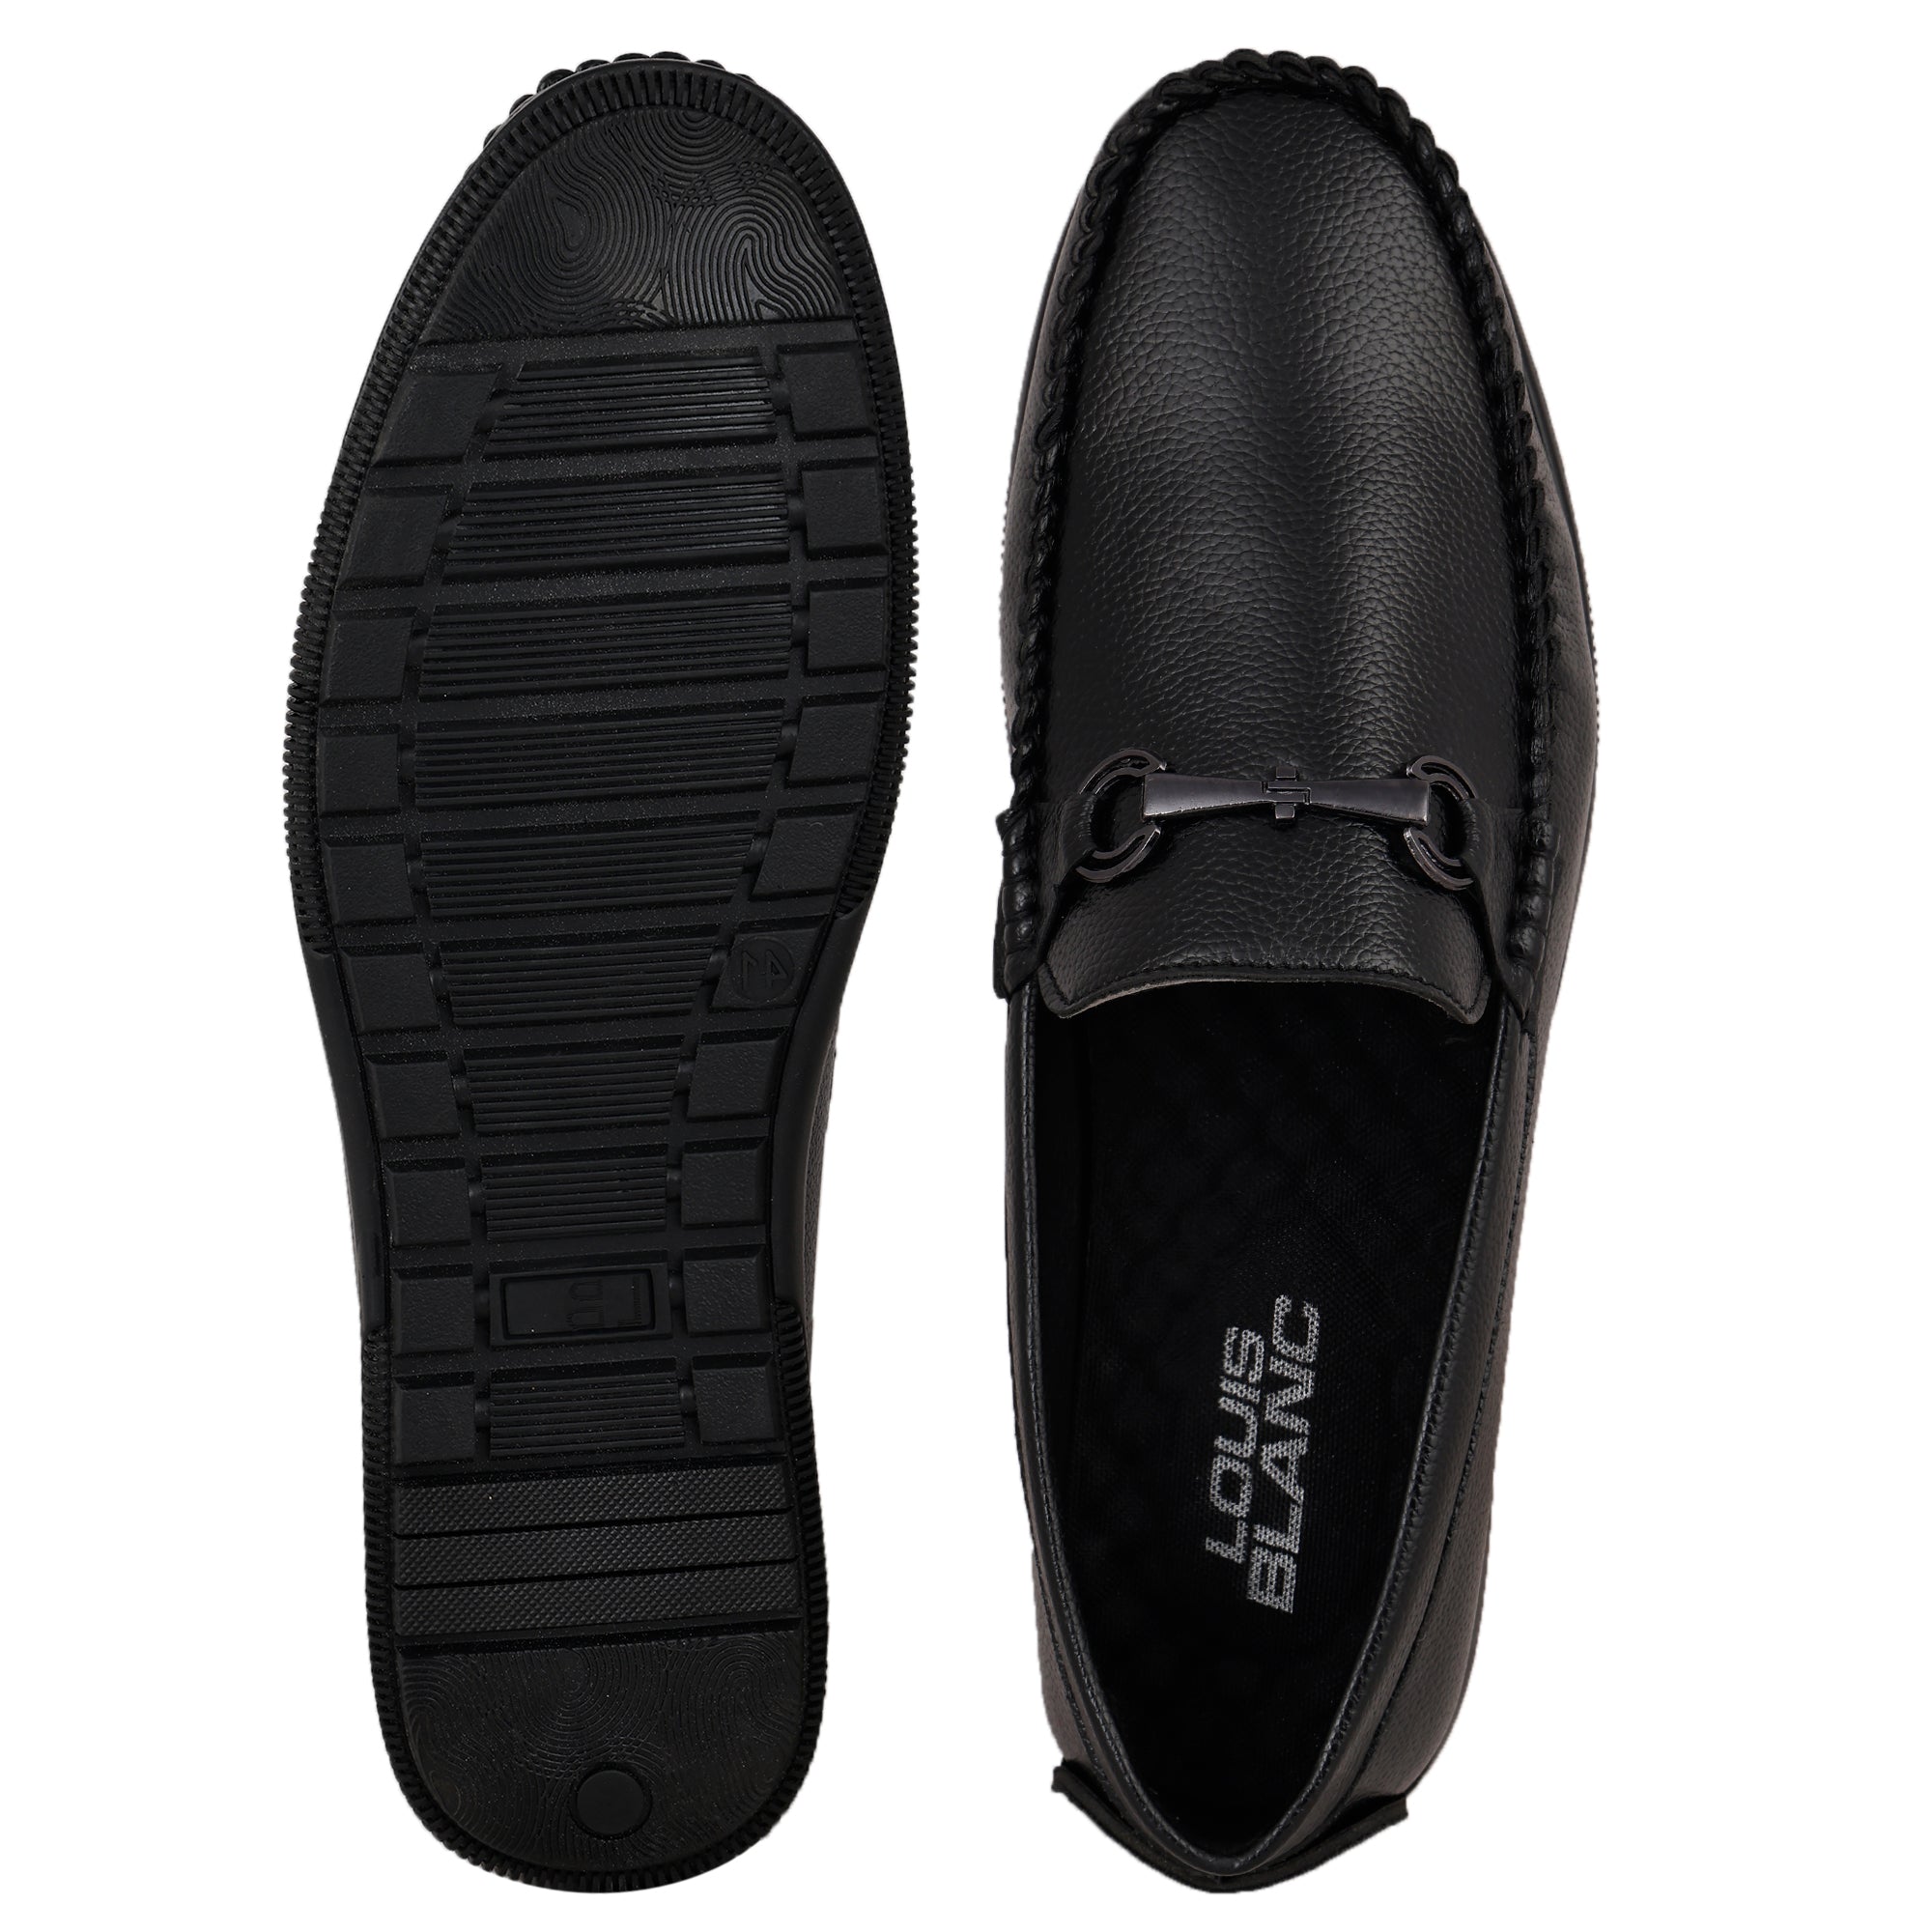 LB 40 Laredo Black Slip On Style Loafer Most Comfortable Doctor Insole With Wrinkle Free Fox Leather Loafers.